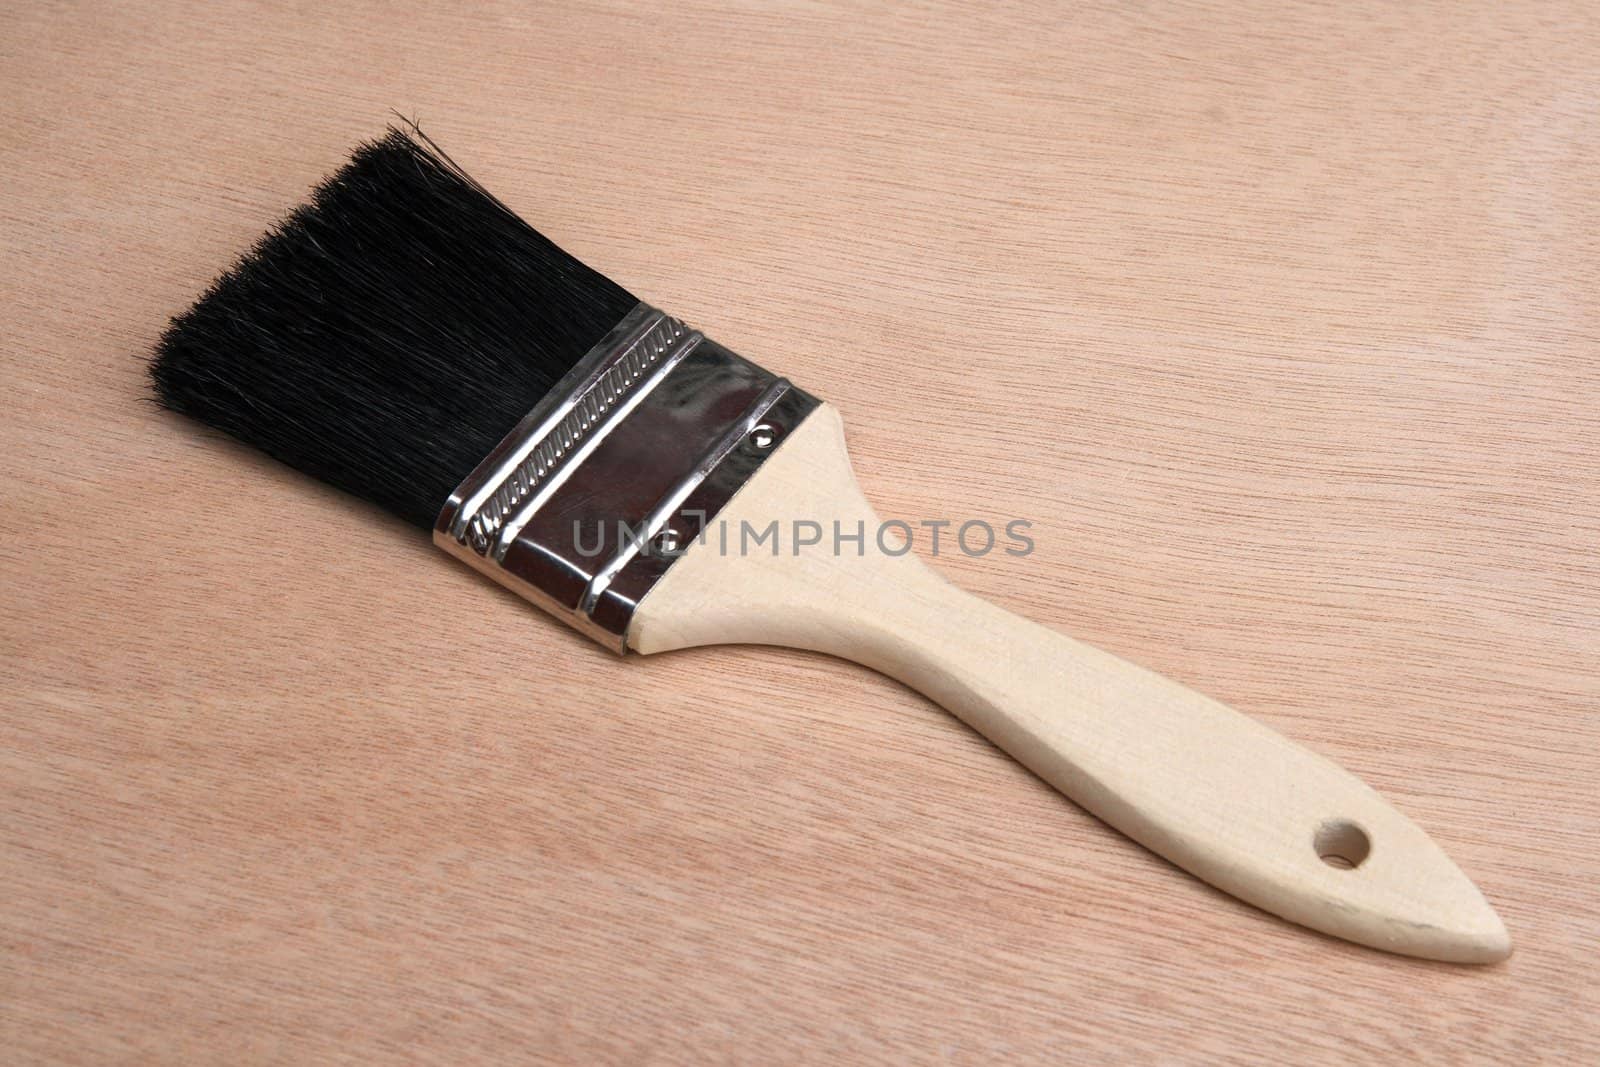 New paint brush on unpainted wood background.